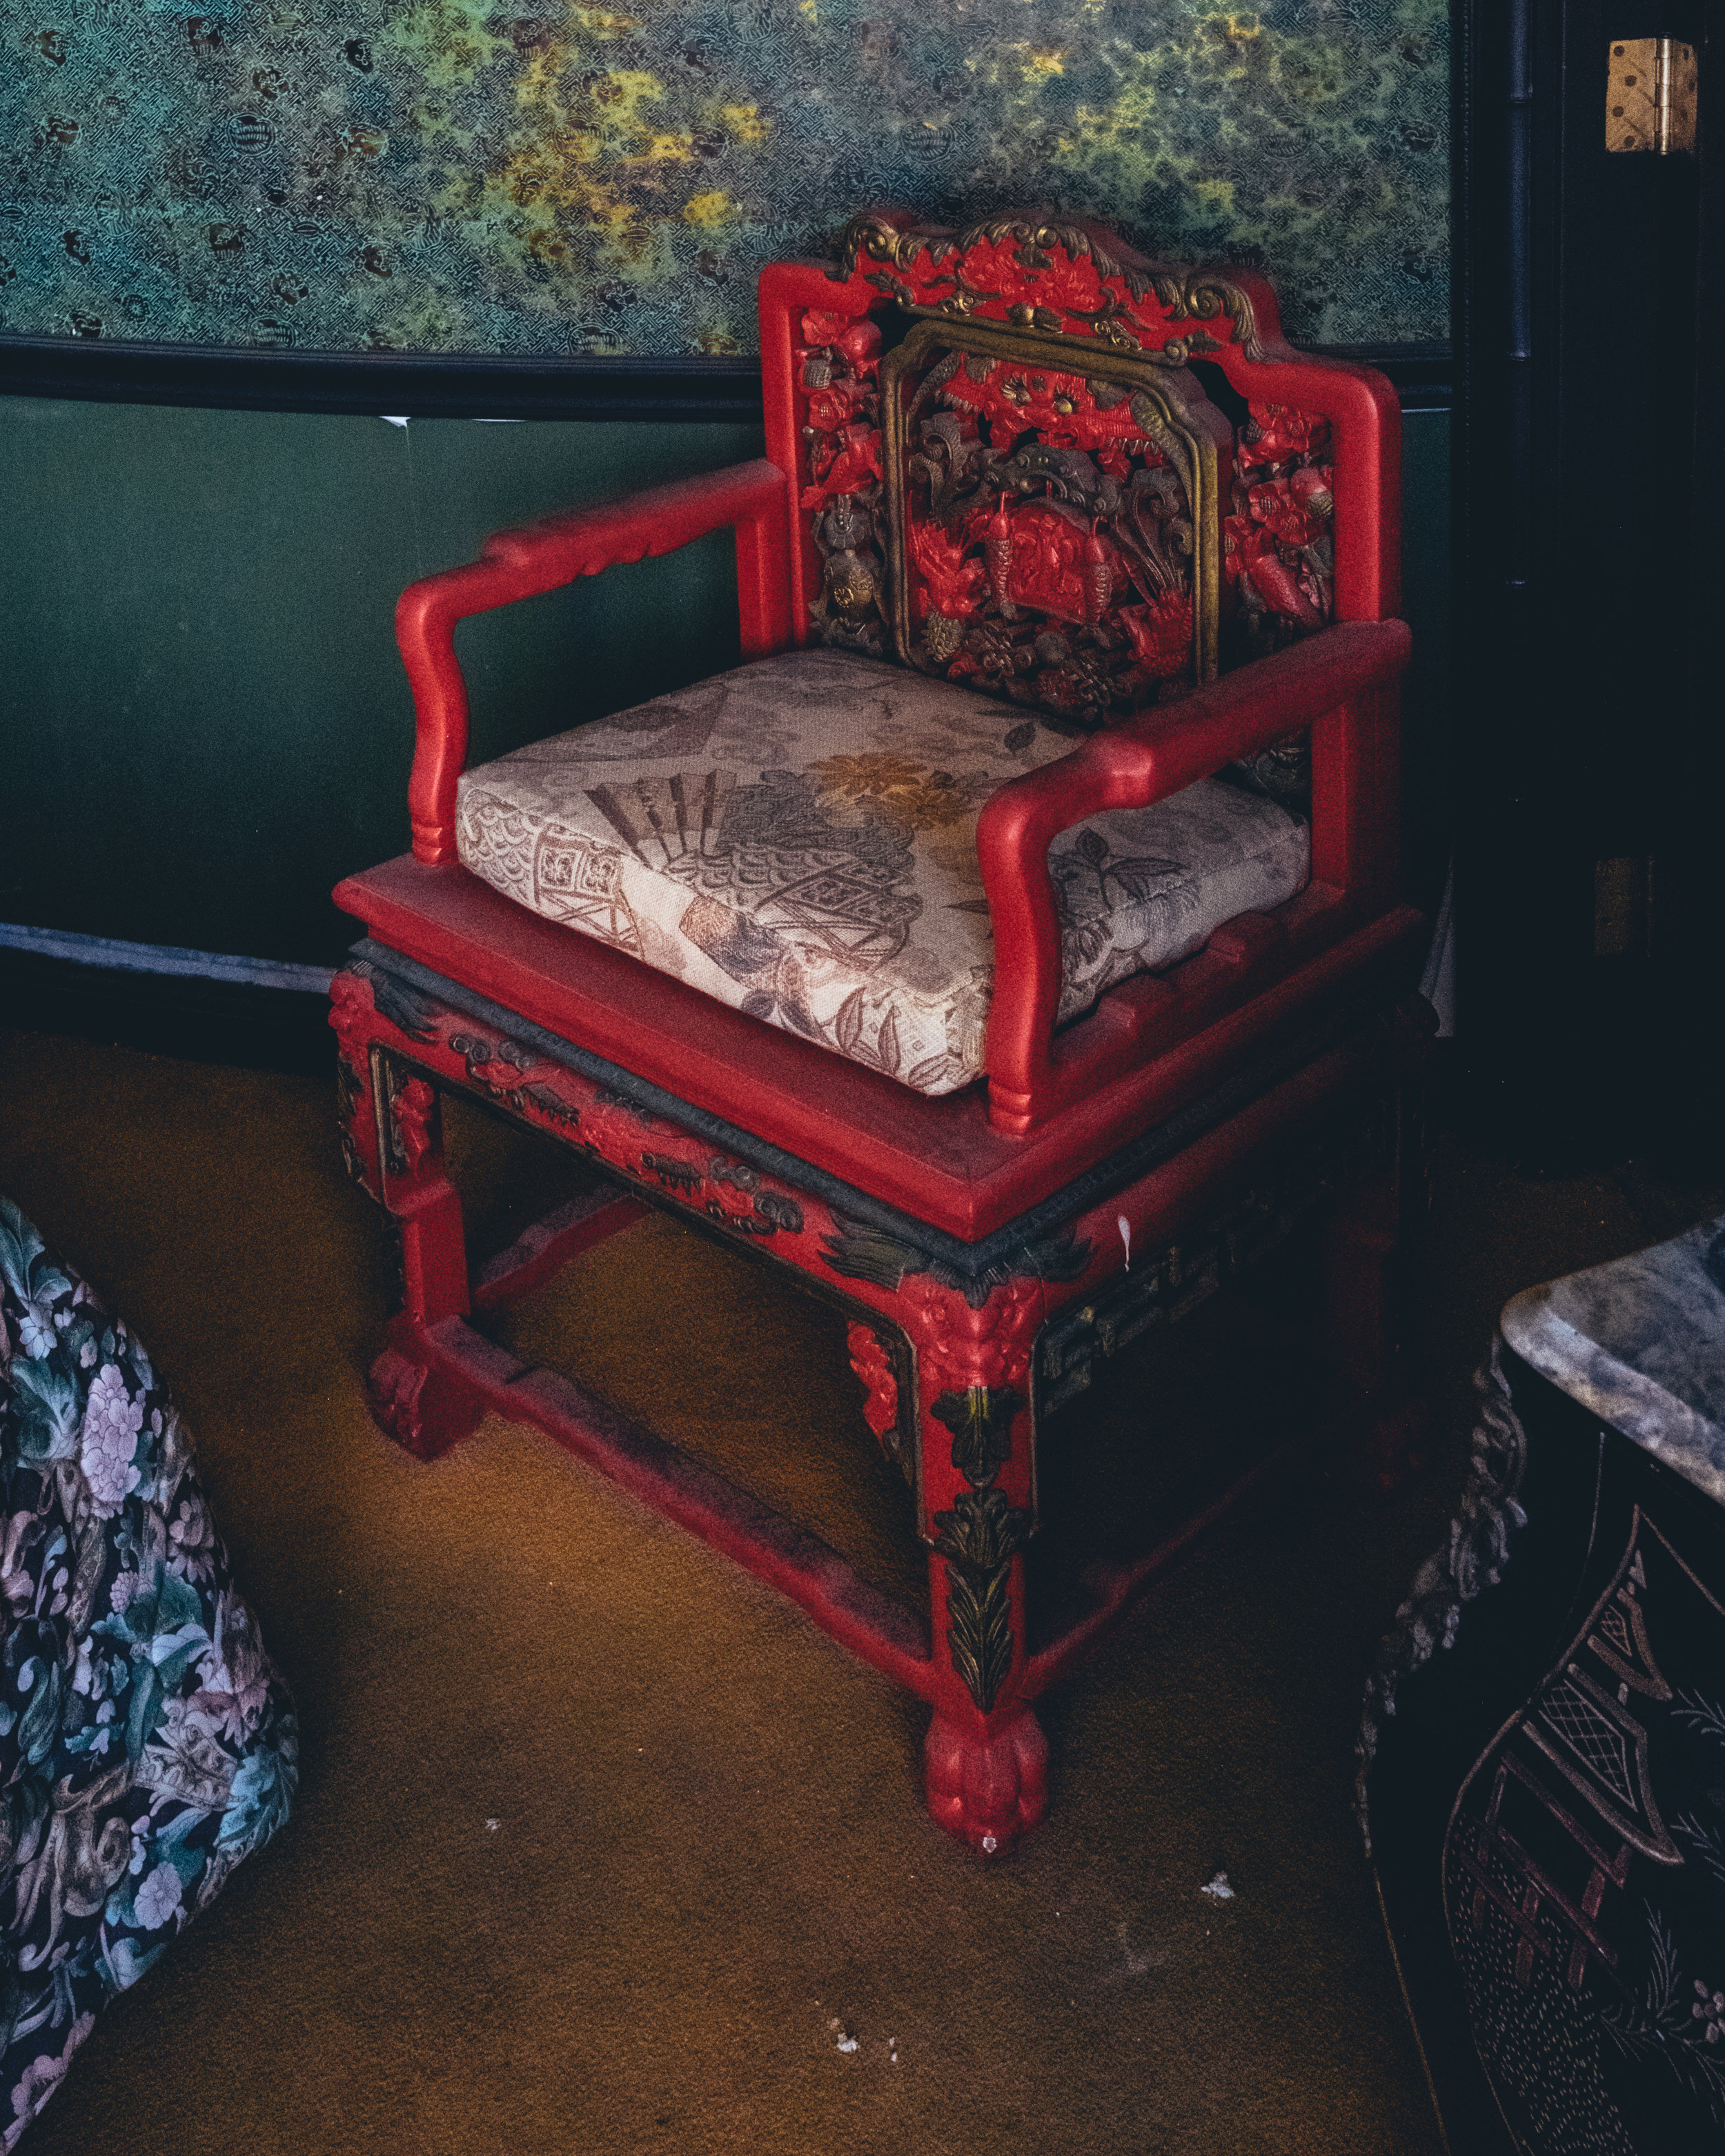  This chair’s pop of red in an otherwise cool toned room is something I’m going to do in my next apartment. 